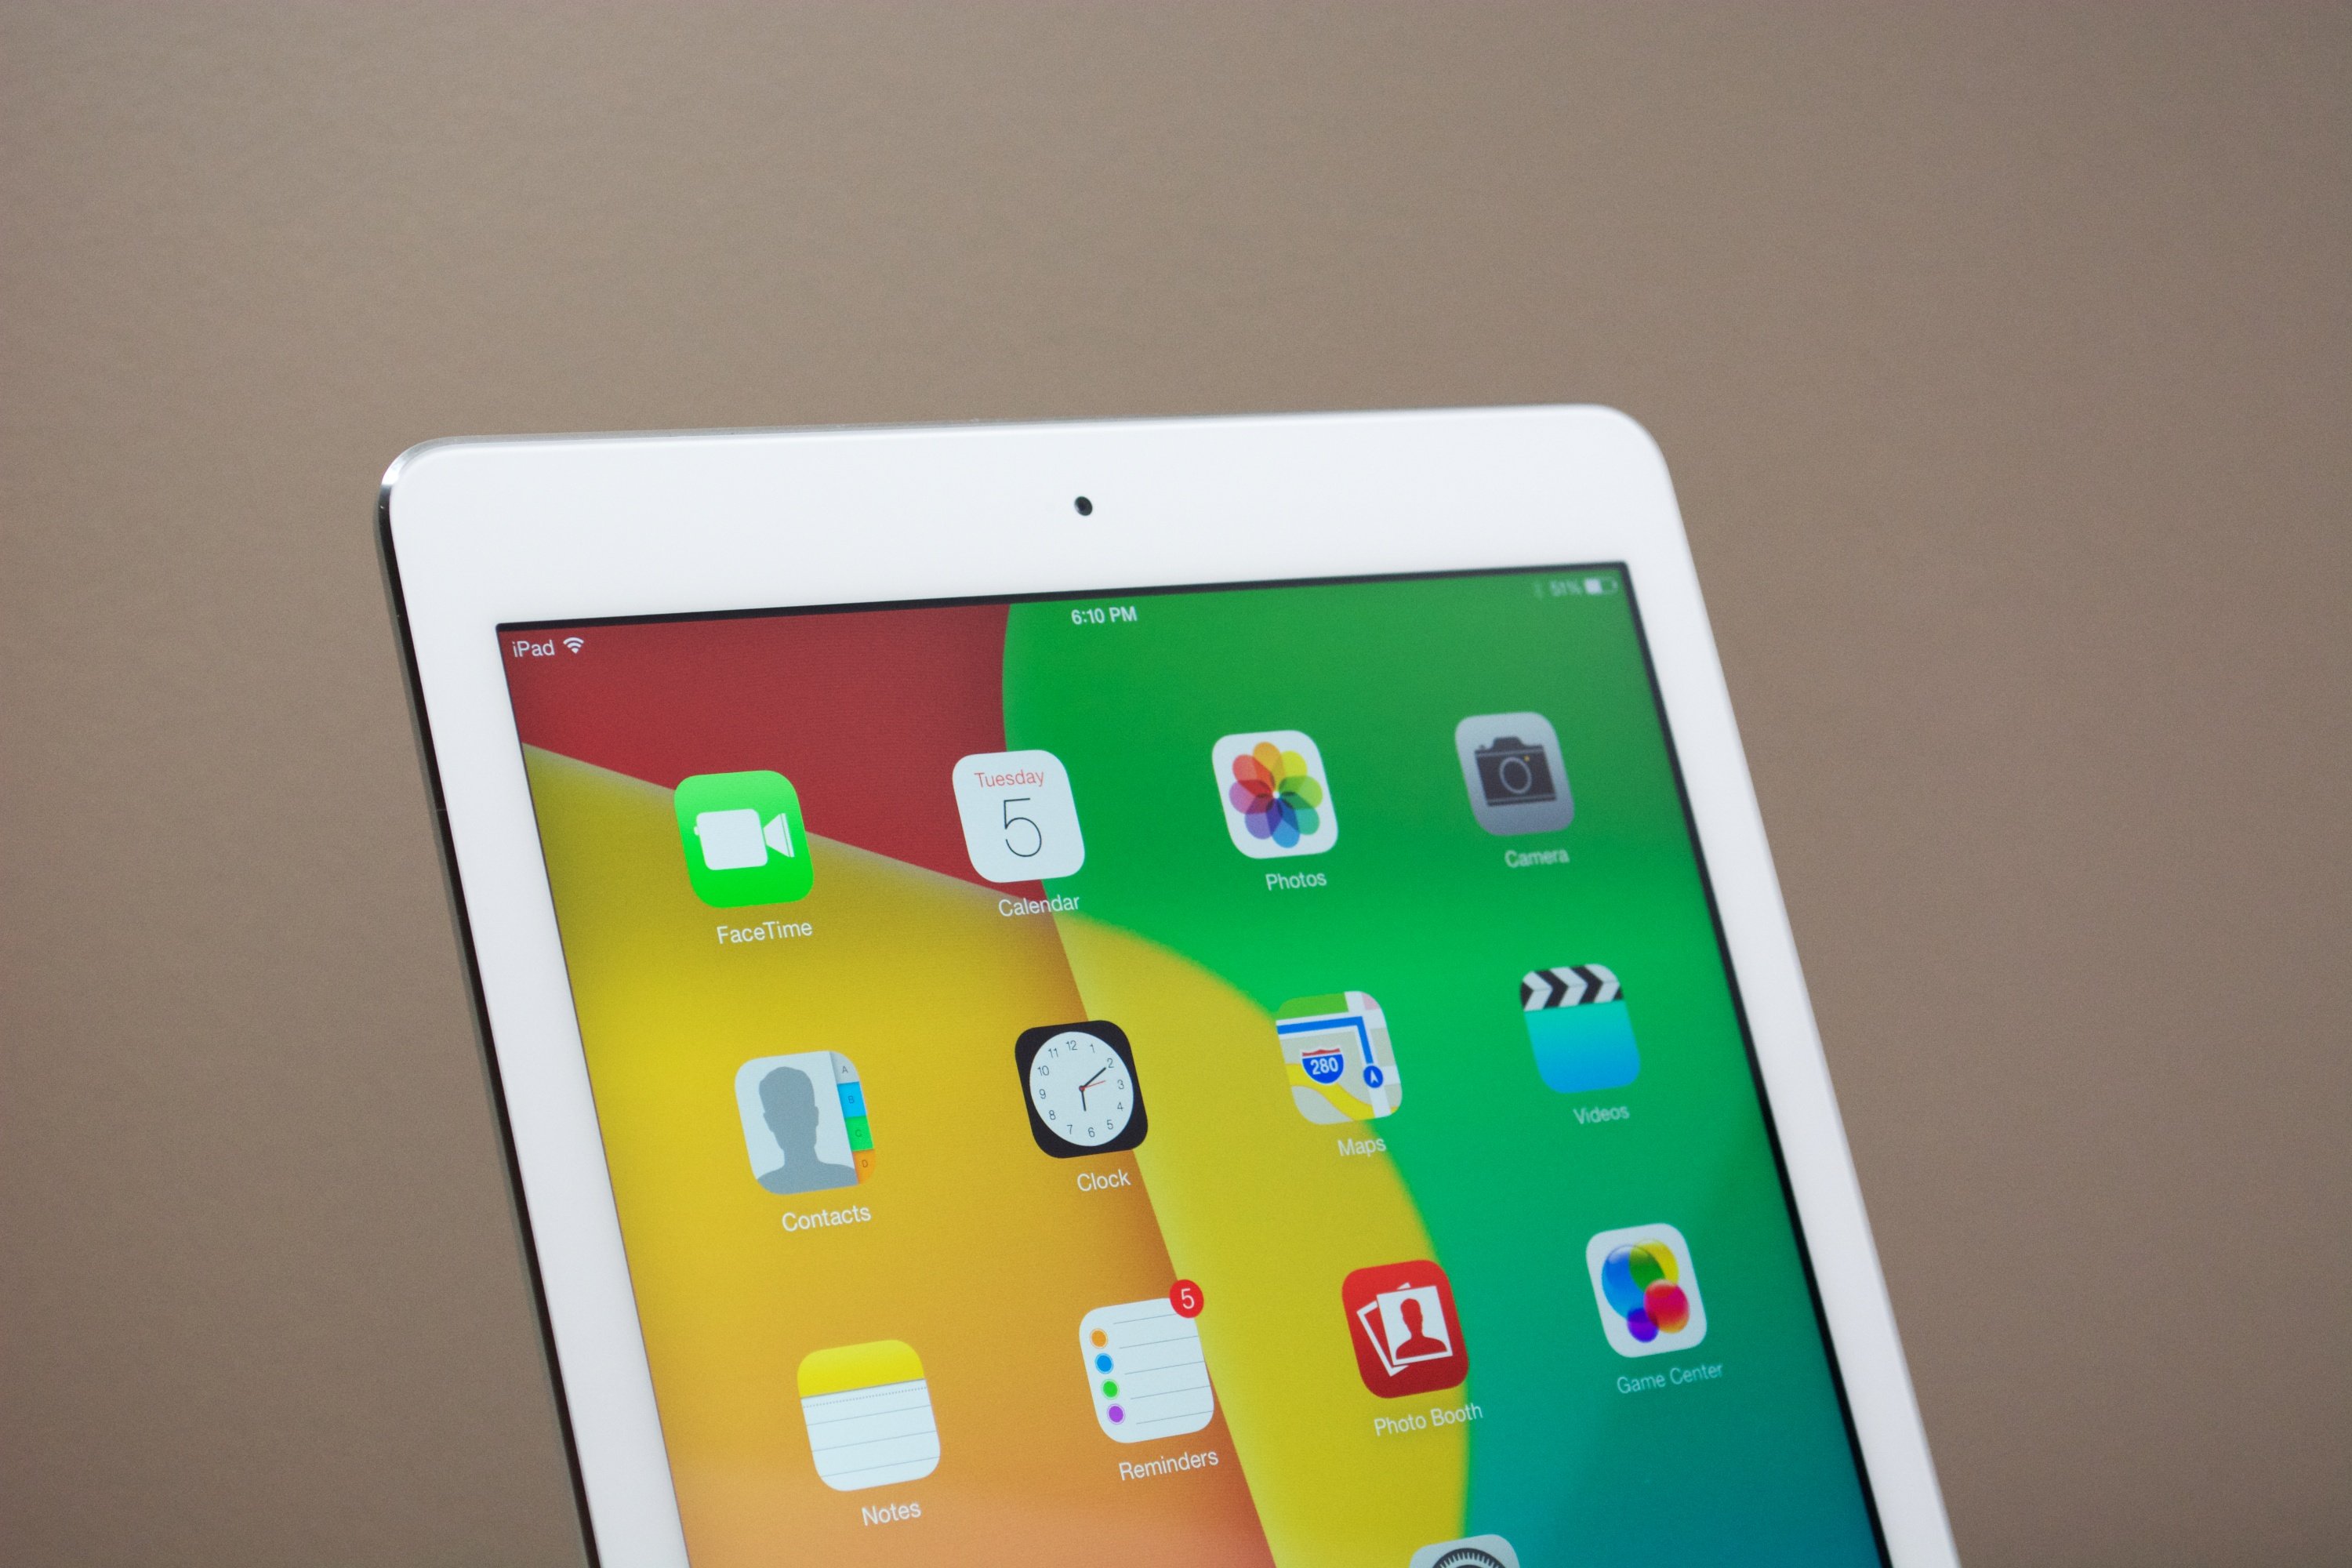 The iOS 7.1 release could come this week according to a developer with tight Apple connections.